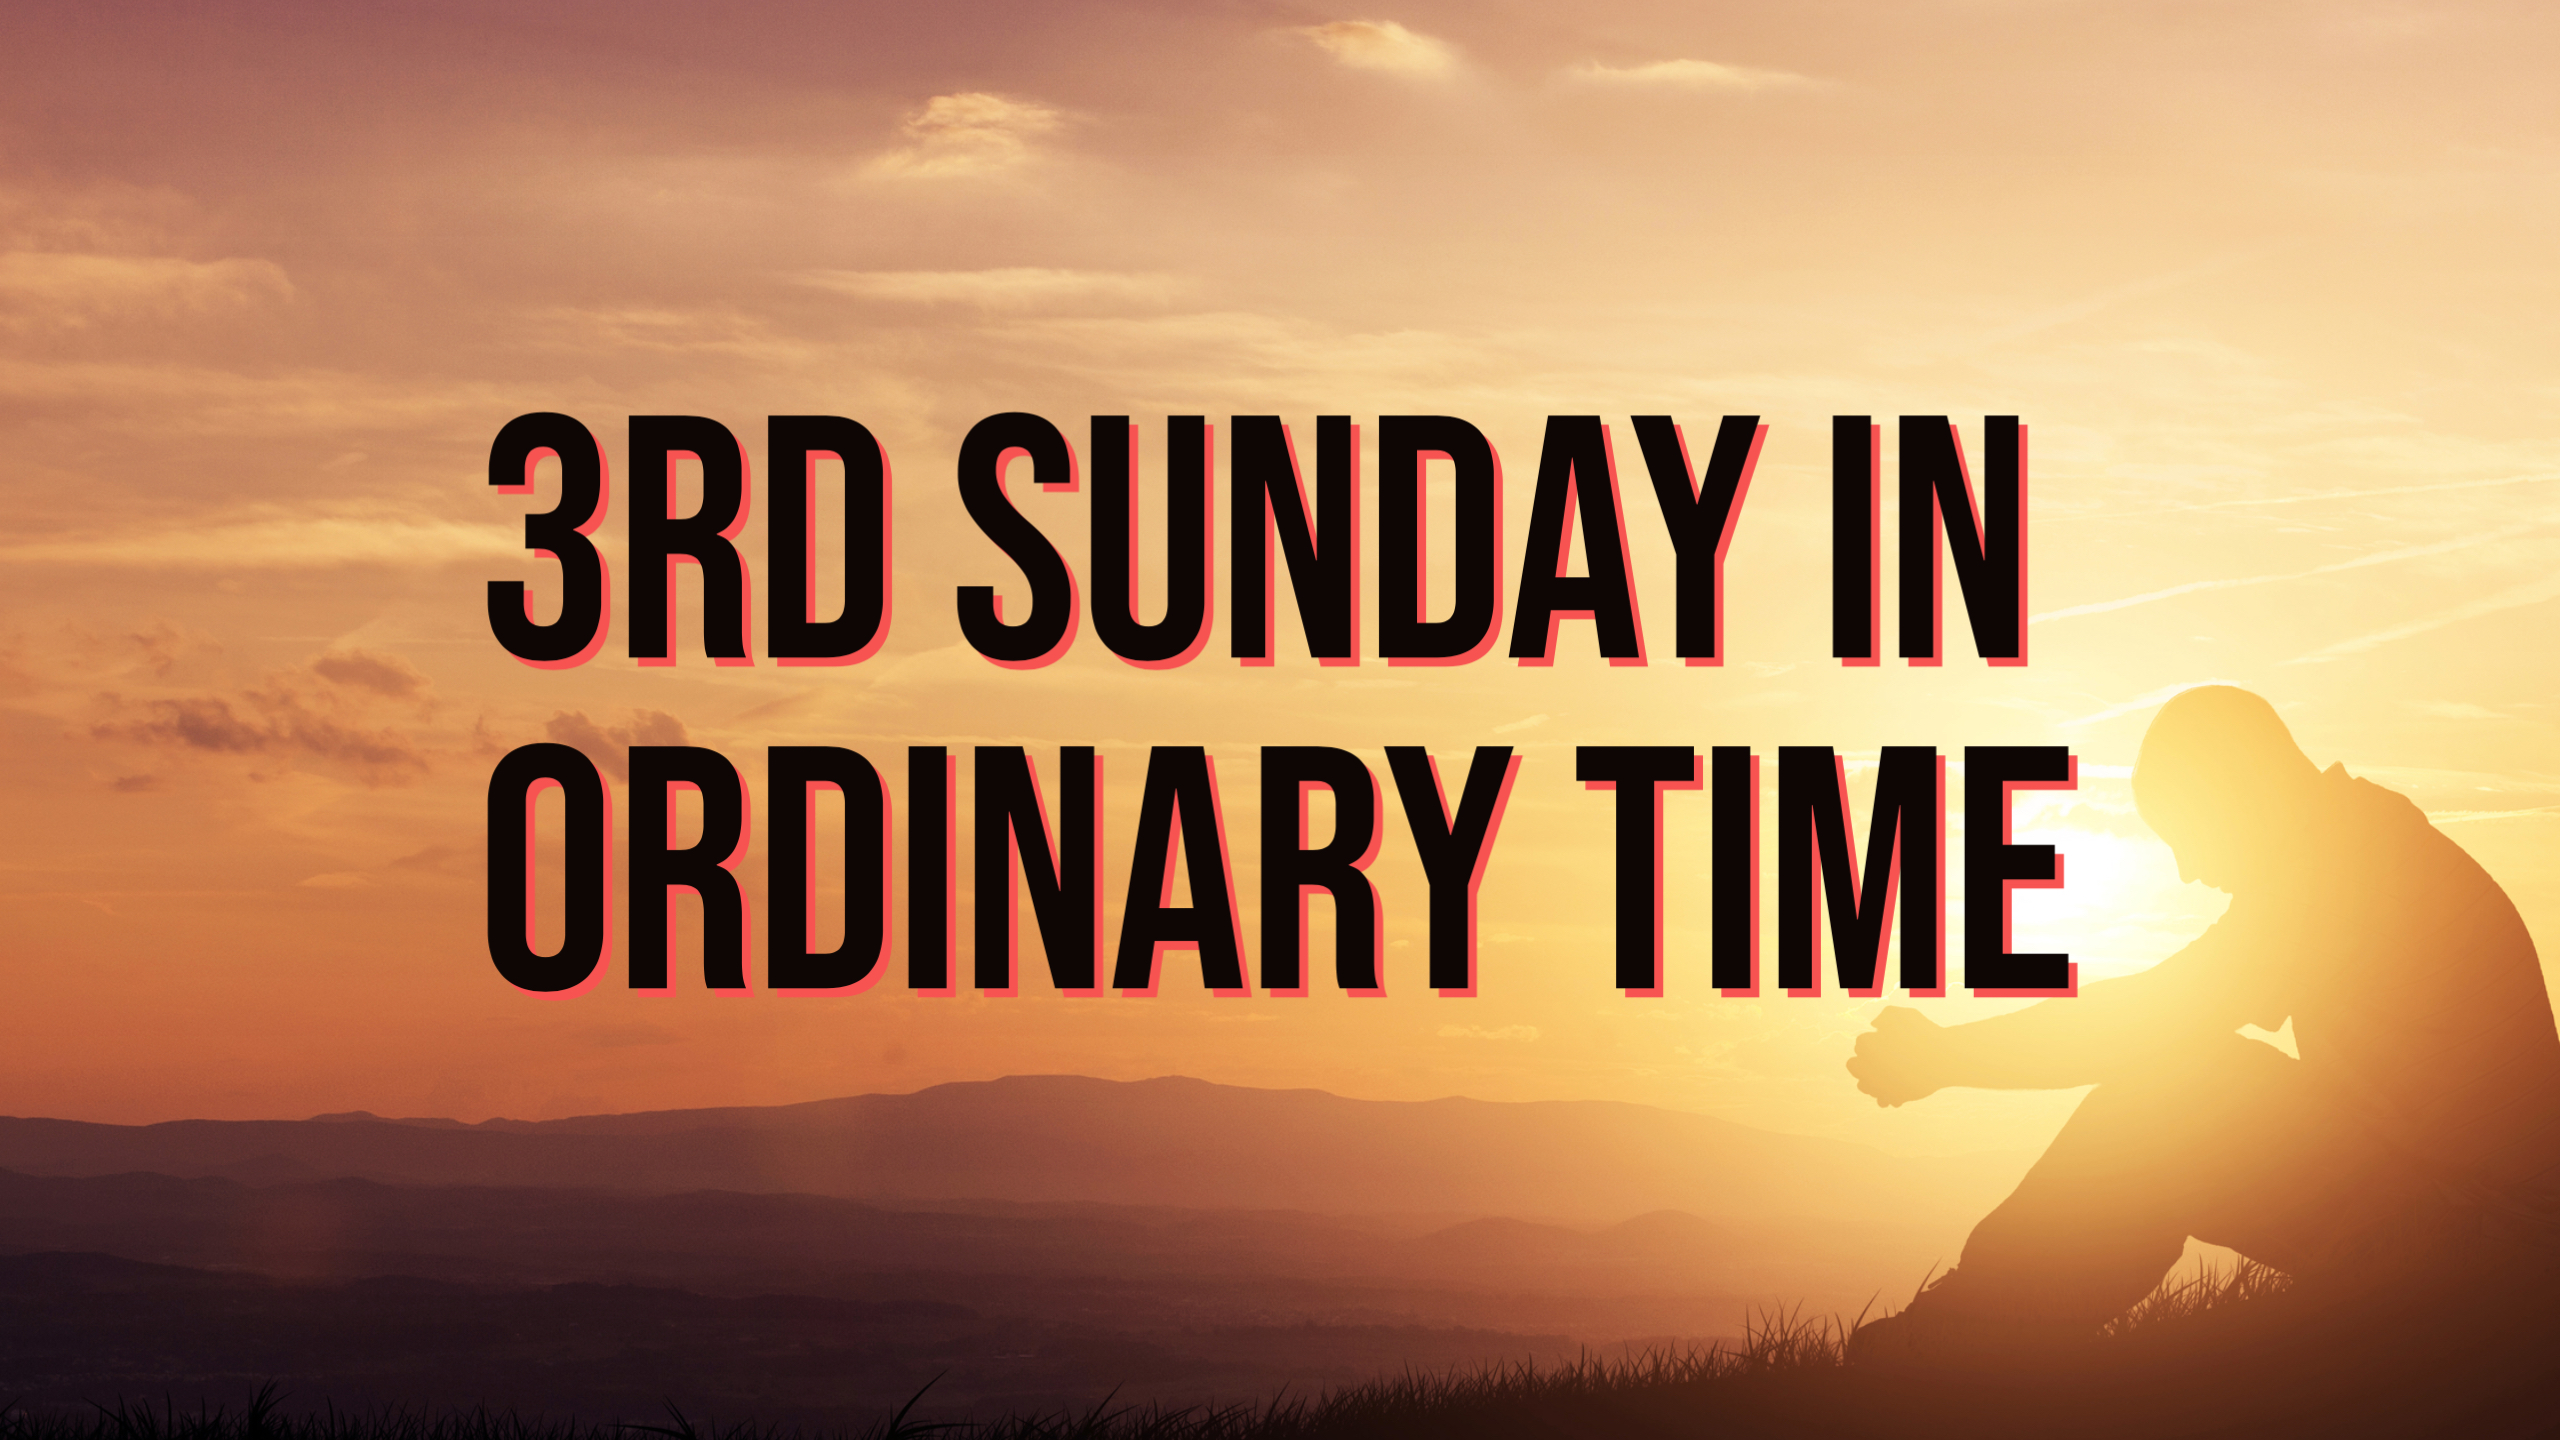 3rd Sunday in Ordinary Time